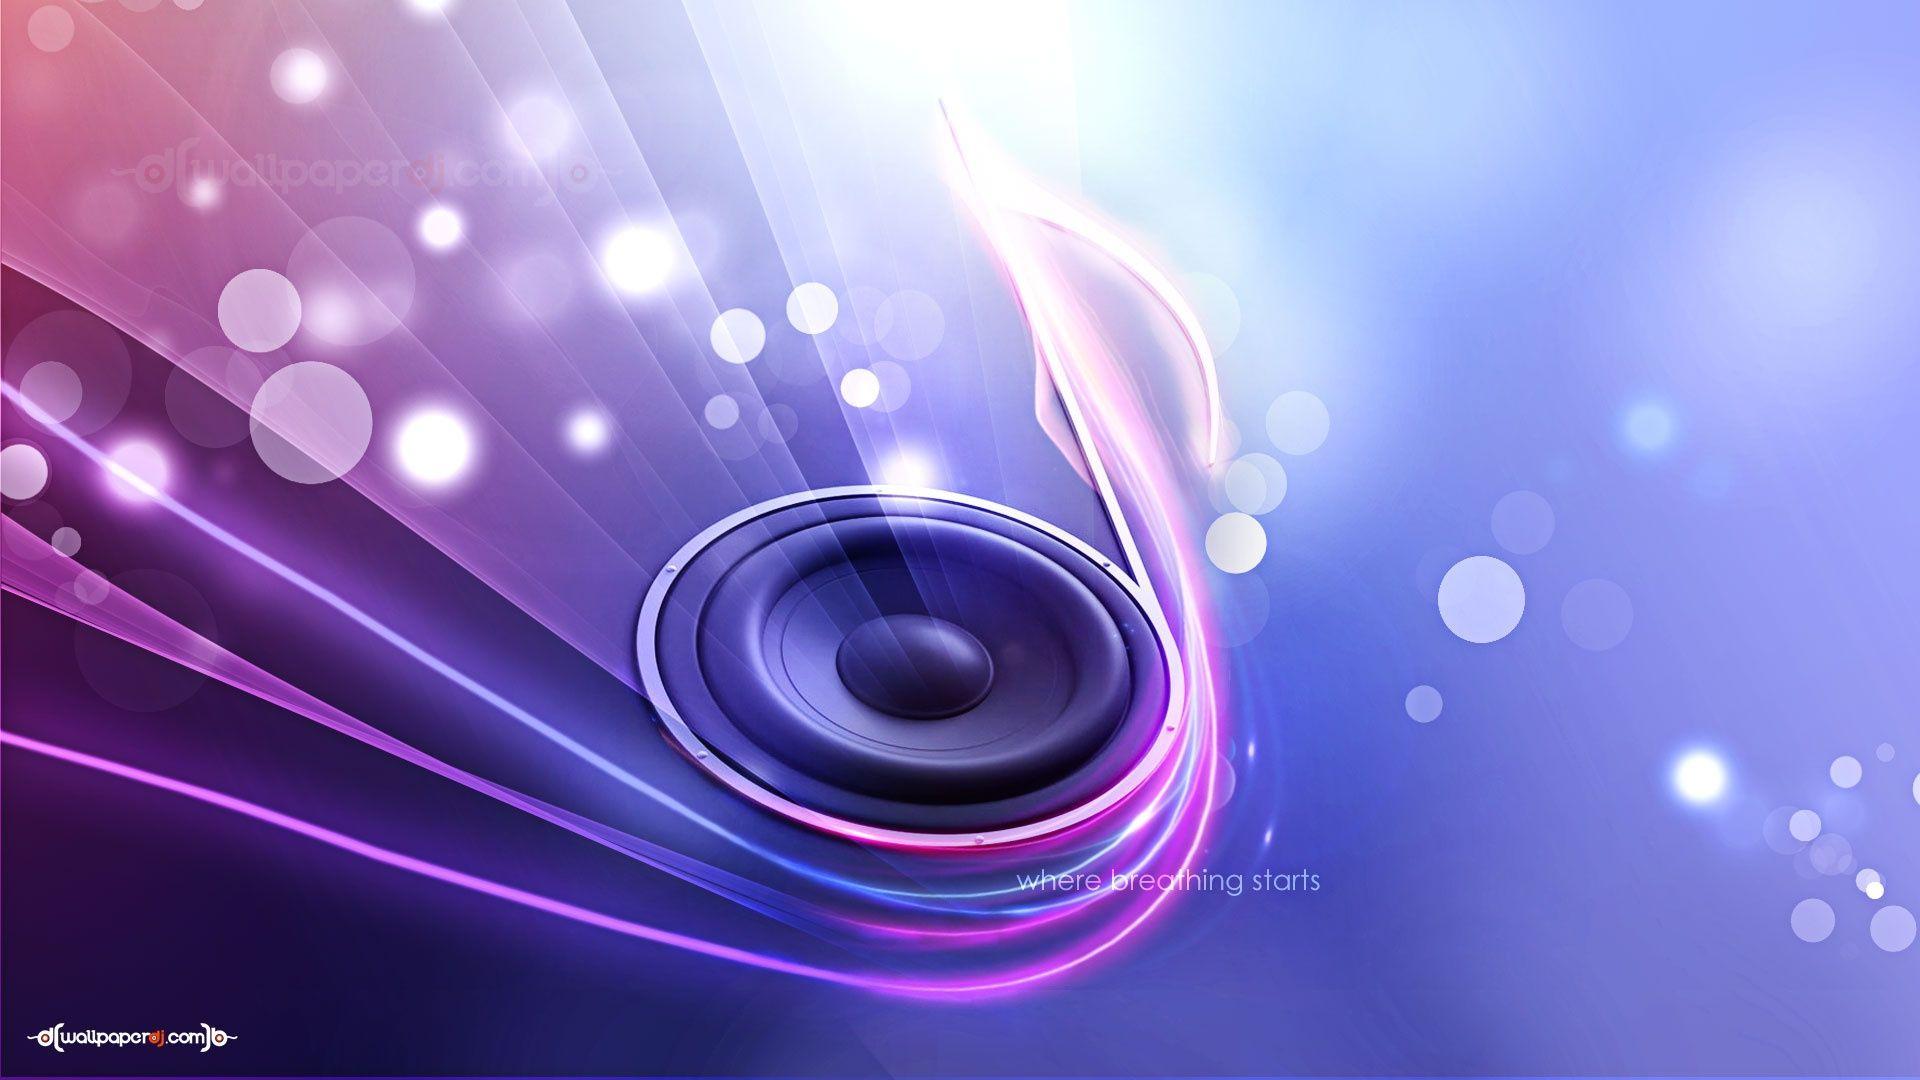 The Soul Of Sound wallpaper, music and dance wallpaper